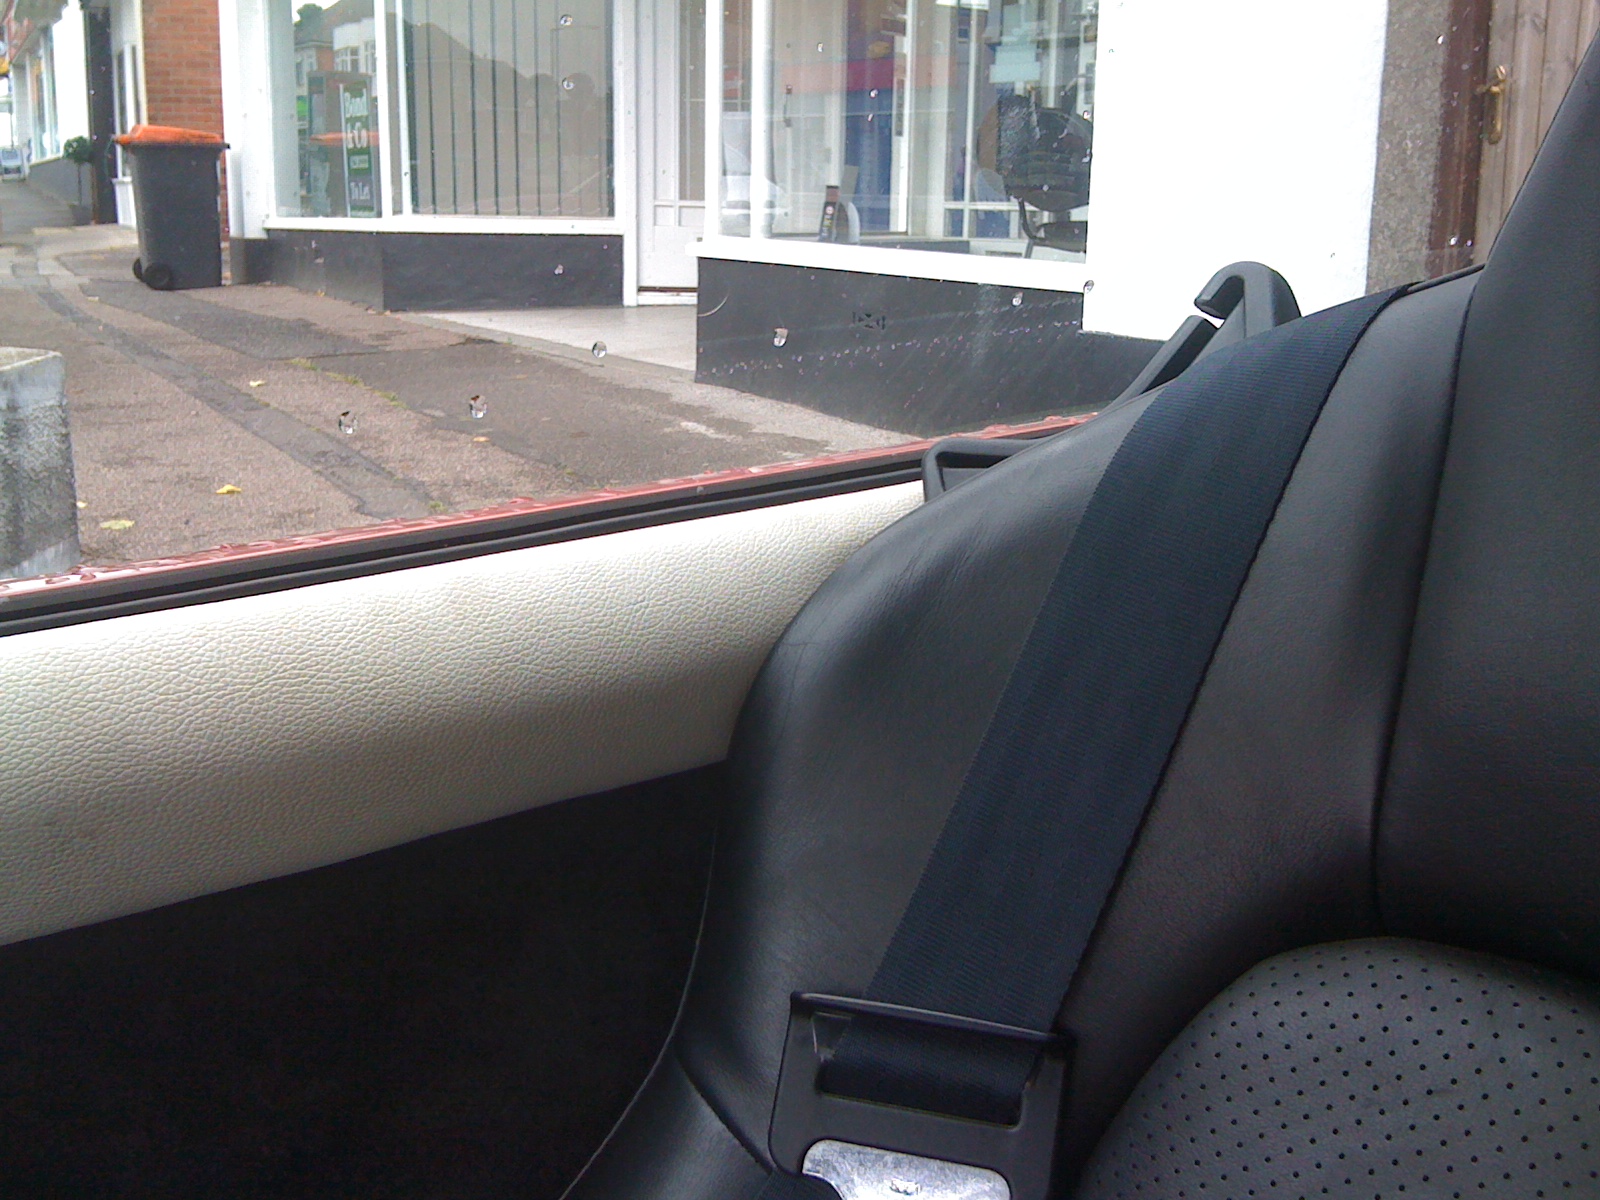 Honda Fitted Seats Cerb Pistonheads Successfully